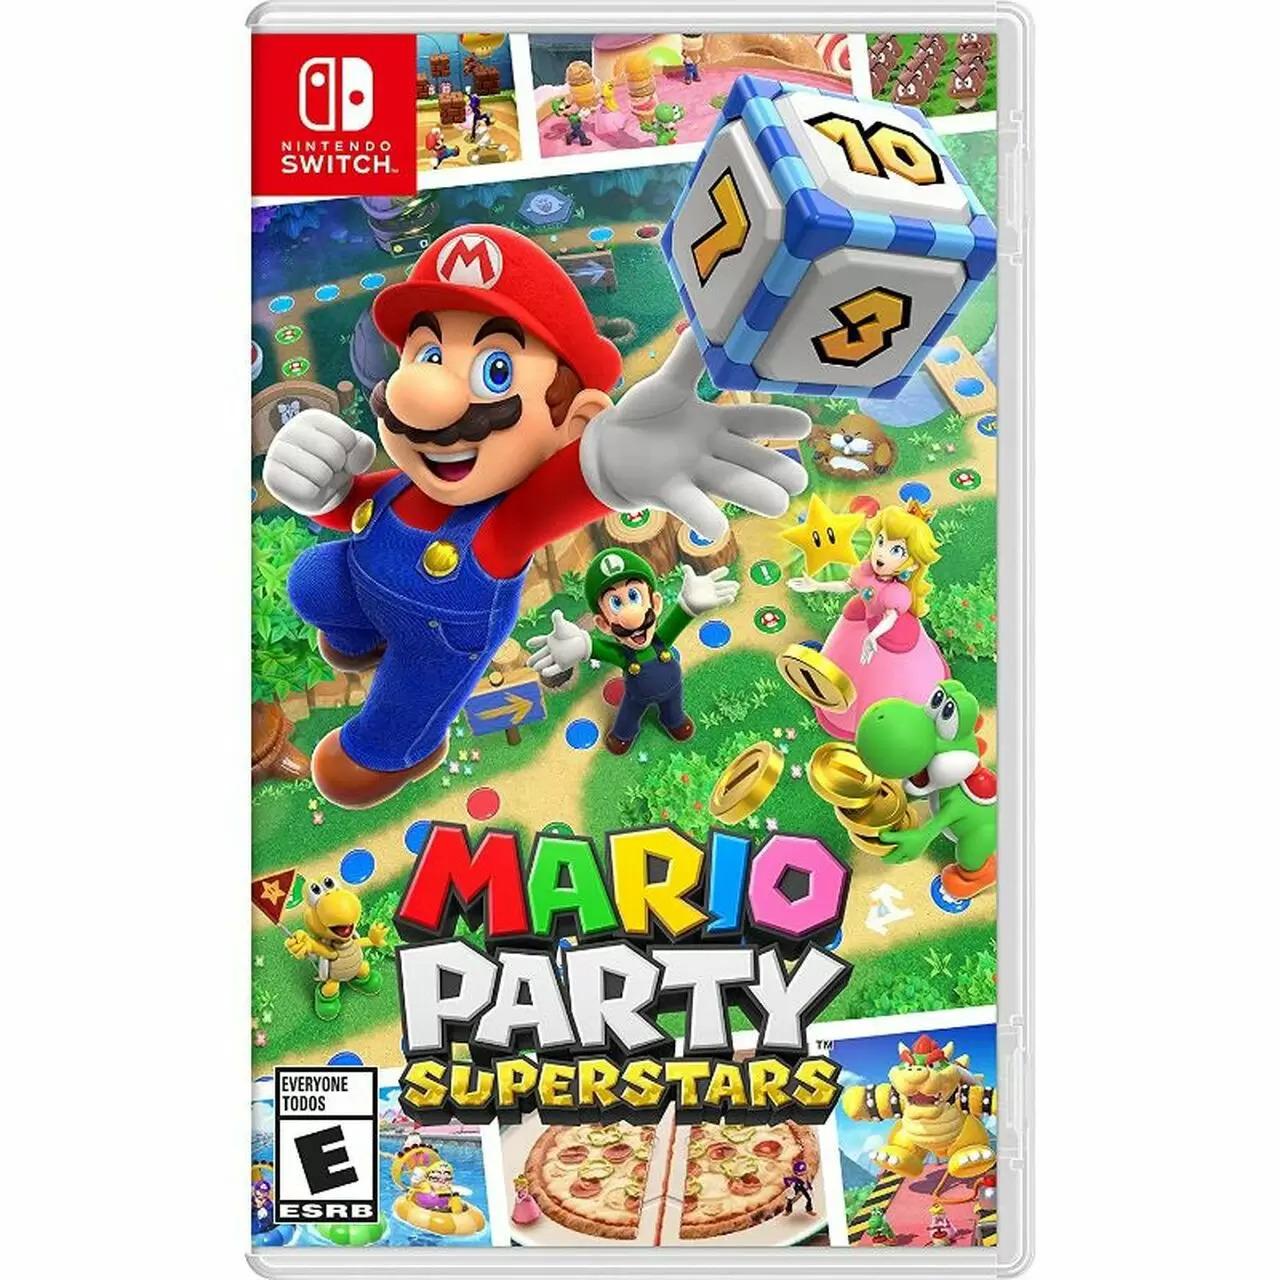 Mario Party Superstars Nintendo Switch for $39.99 Shipped